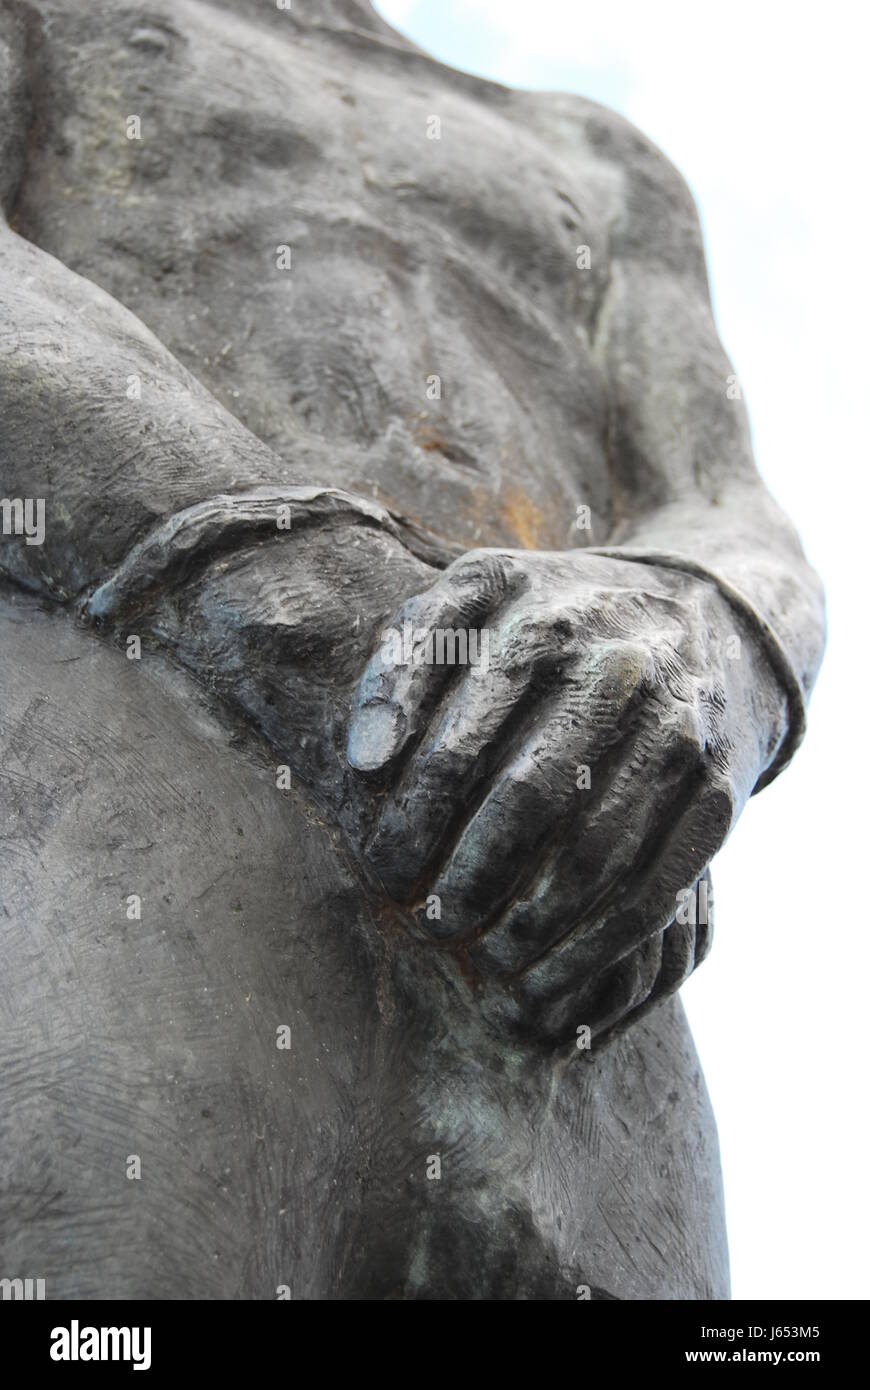 hand hands story monument hamburg elbe pinioned pirate monument statue harbor Stock Photo